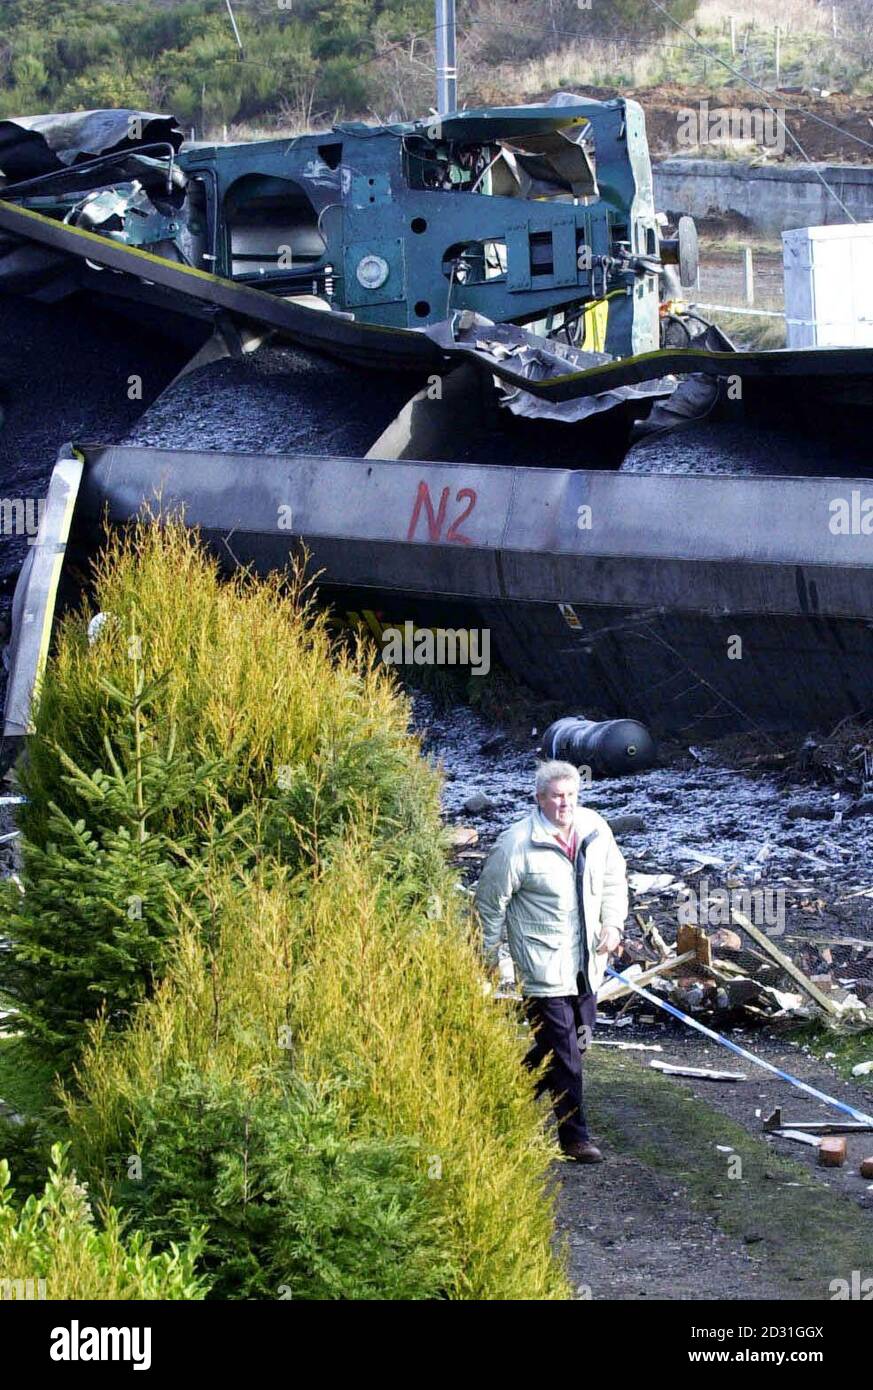 Peter Hintze outside his home in Great Heck, nr Selby, N Yorks. He had returned to inspect the damage to his property caused by the rail disaster that killed 13 people.  Stock Photo